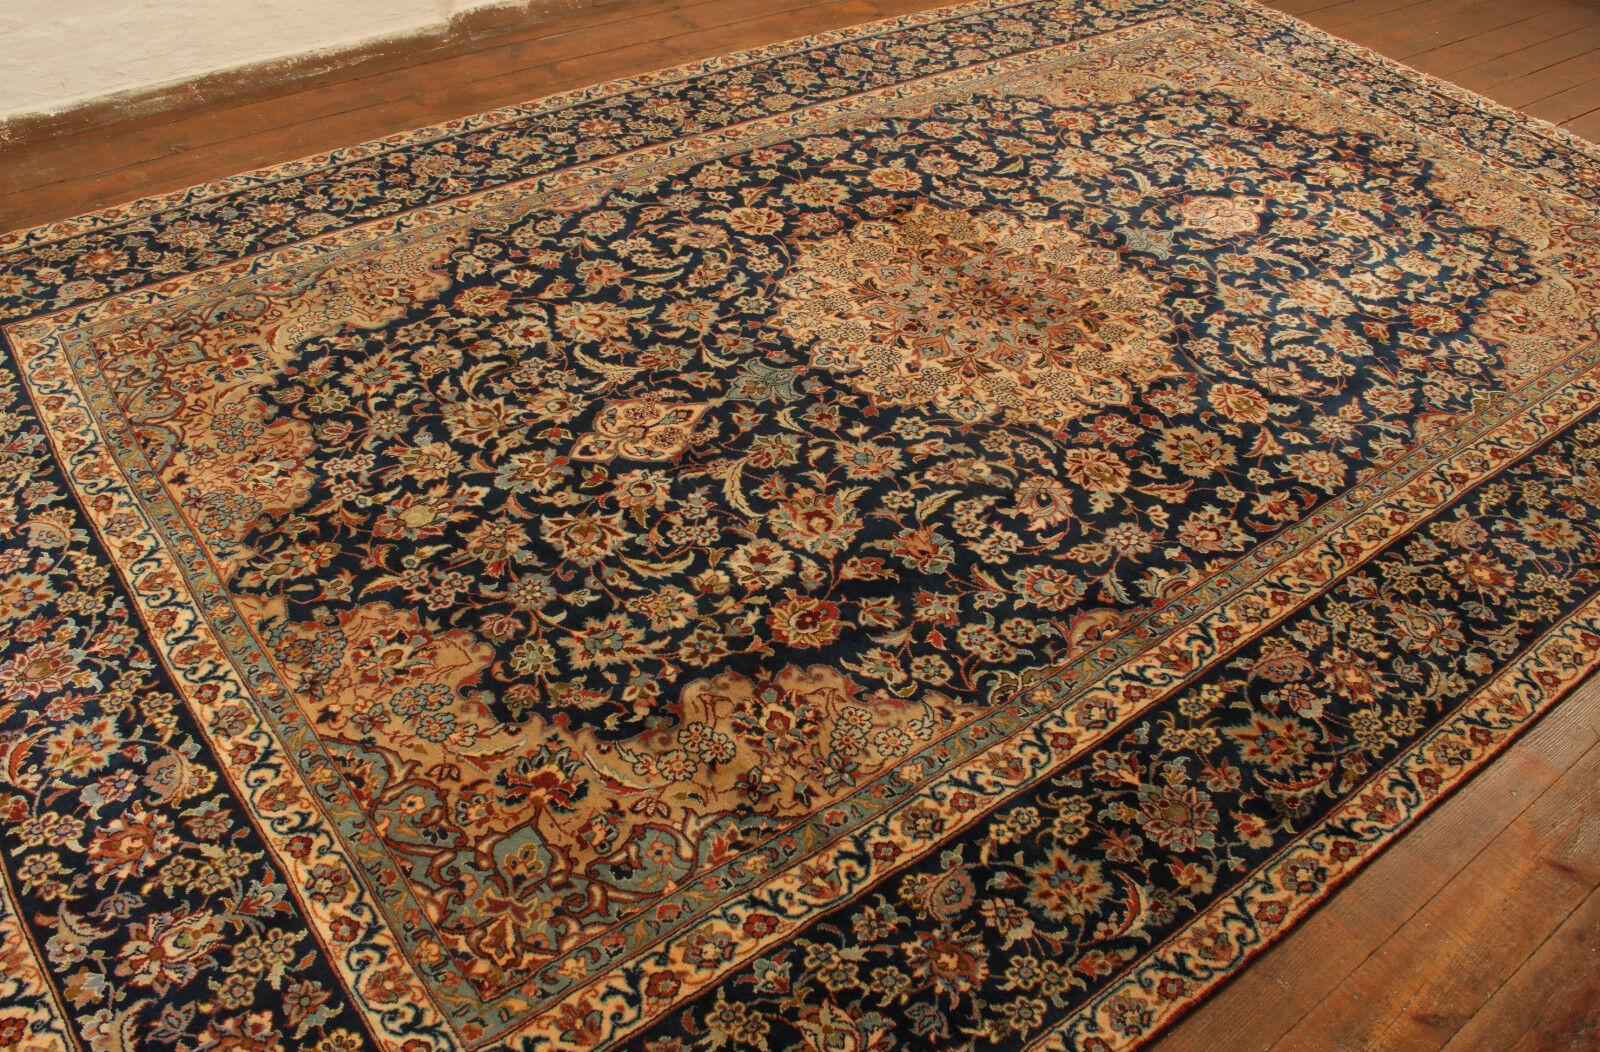 Wool Handmade Vintage Persian Style Isfahan Rug 9.5' x 15', 1970s - 1T29 For Sale